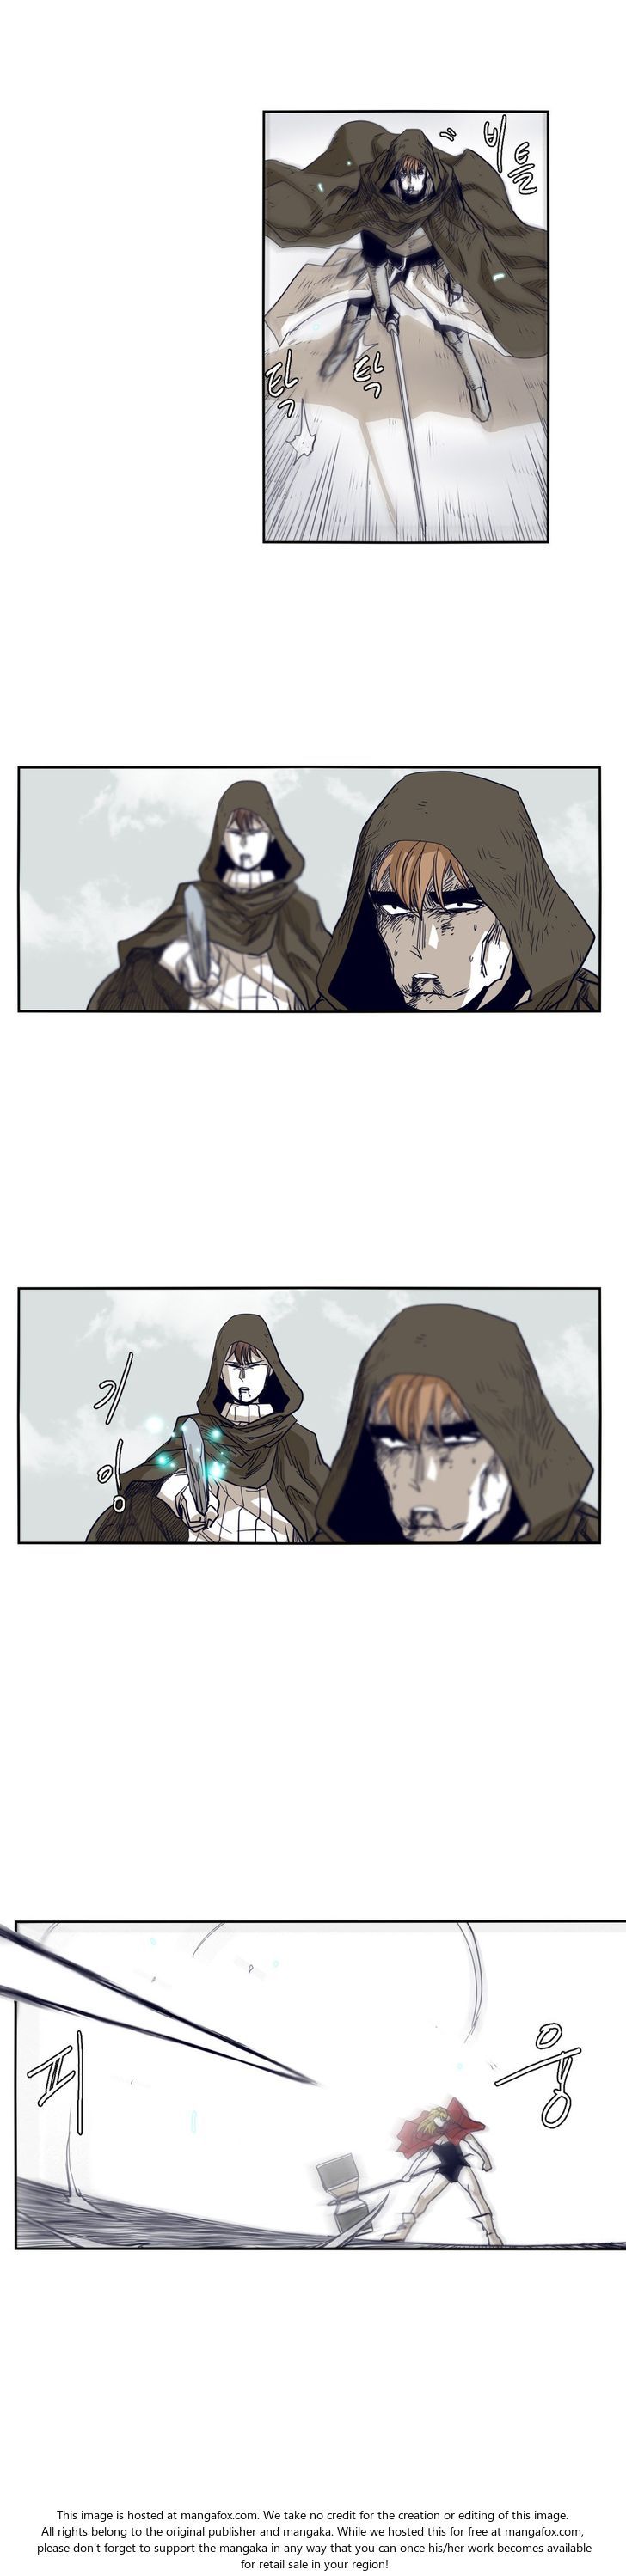 Epic of Gilgamesh Chapter 046 page 12